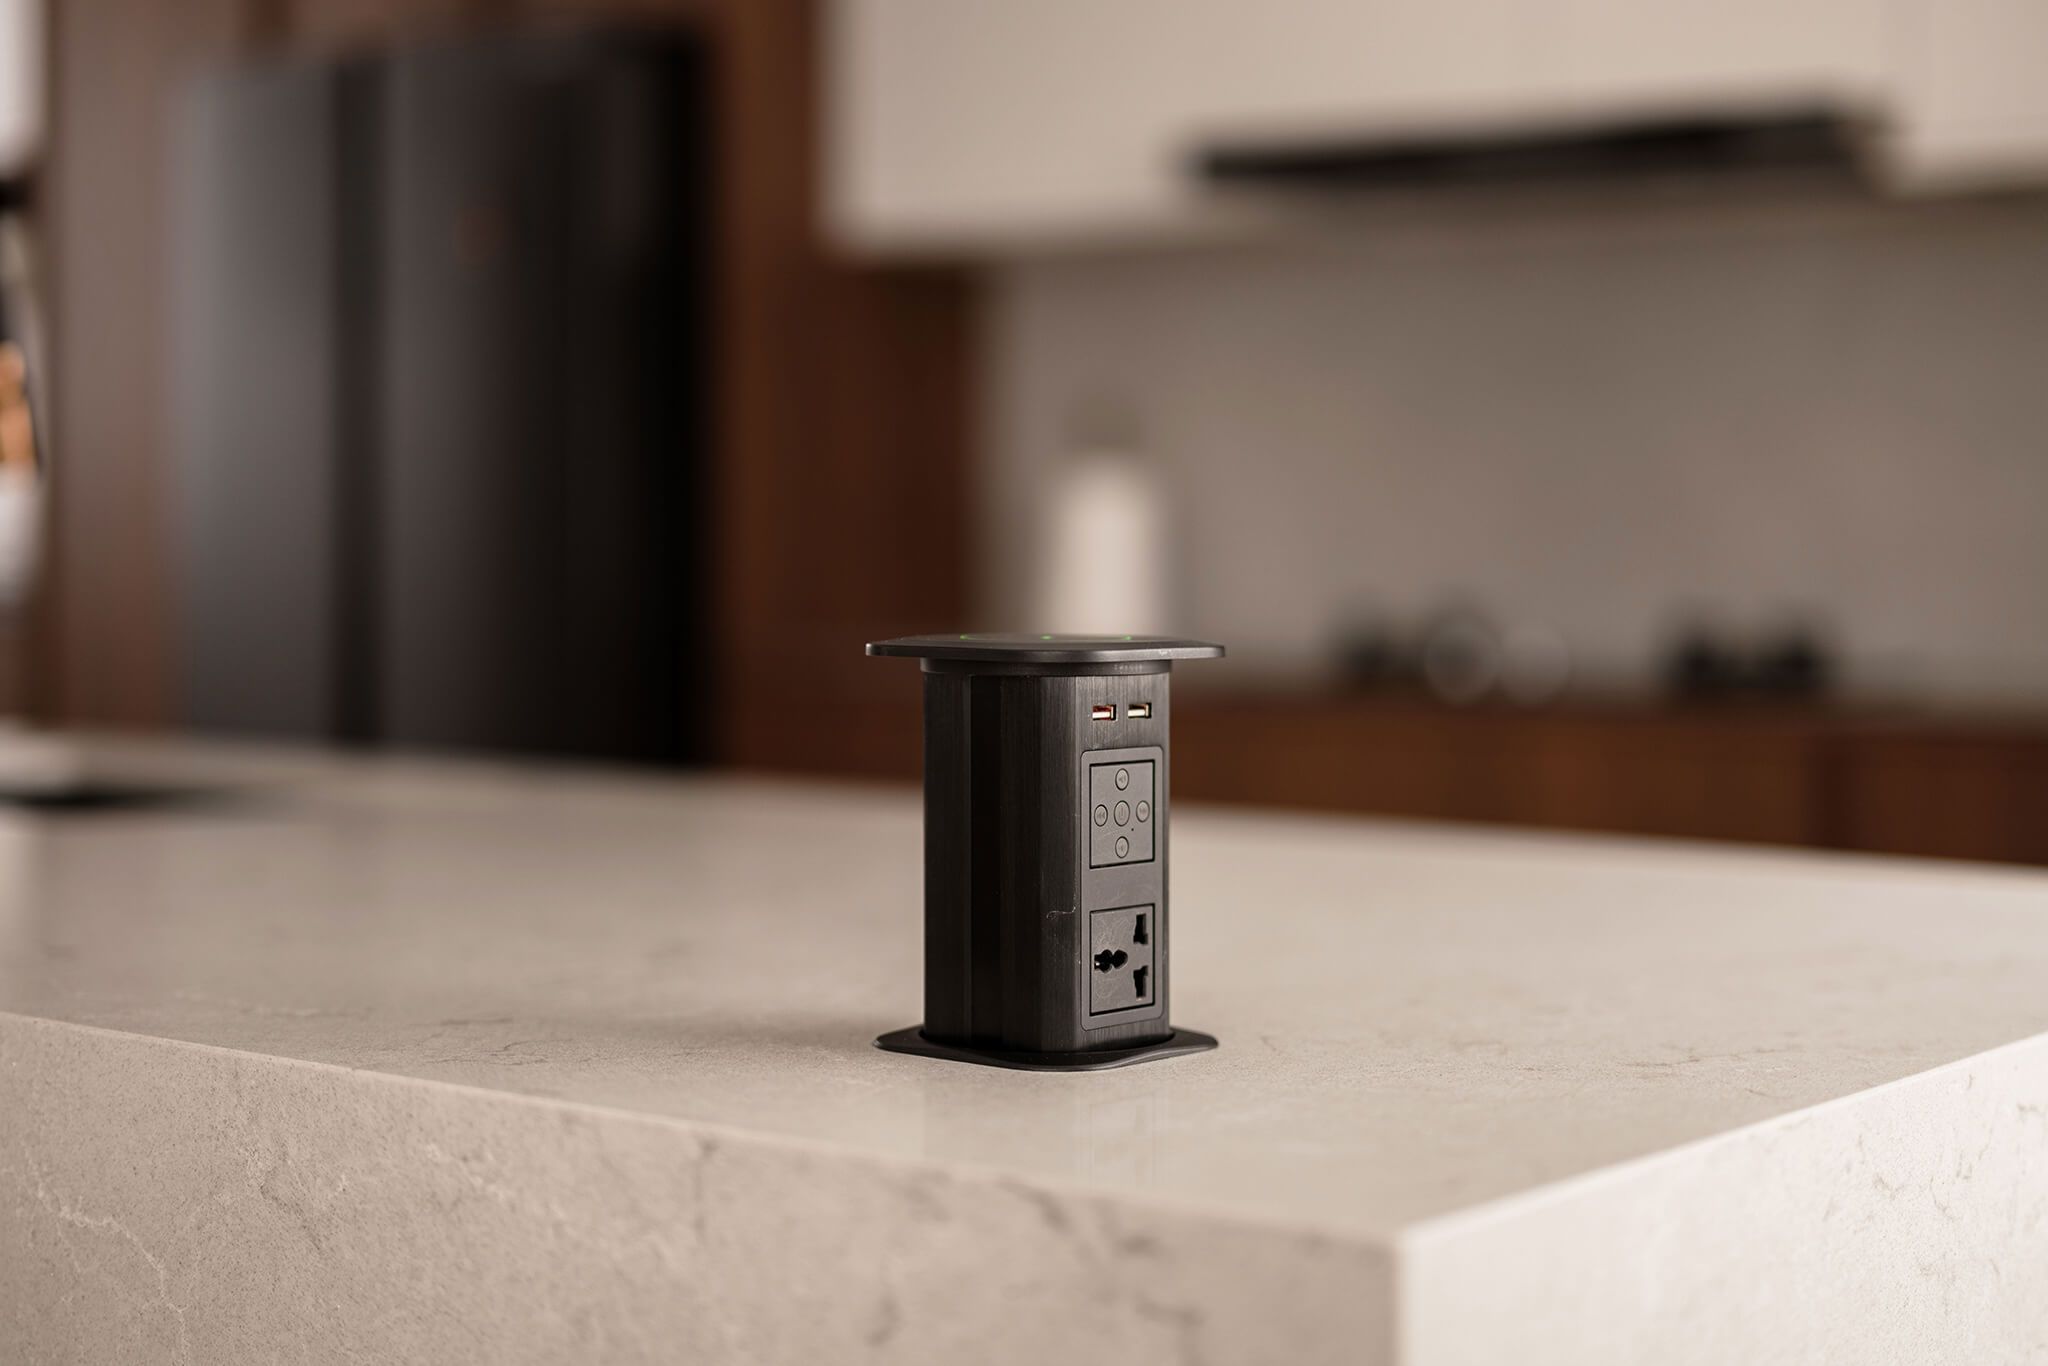 Pop-up electrical outlet on a marble kitchen island countertop providing convenient power access for modern kitchen appliances in a sleek design.